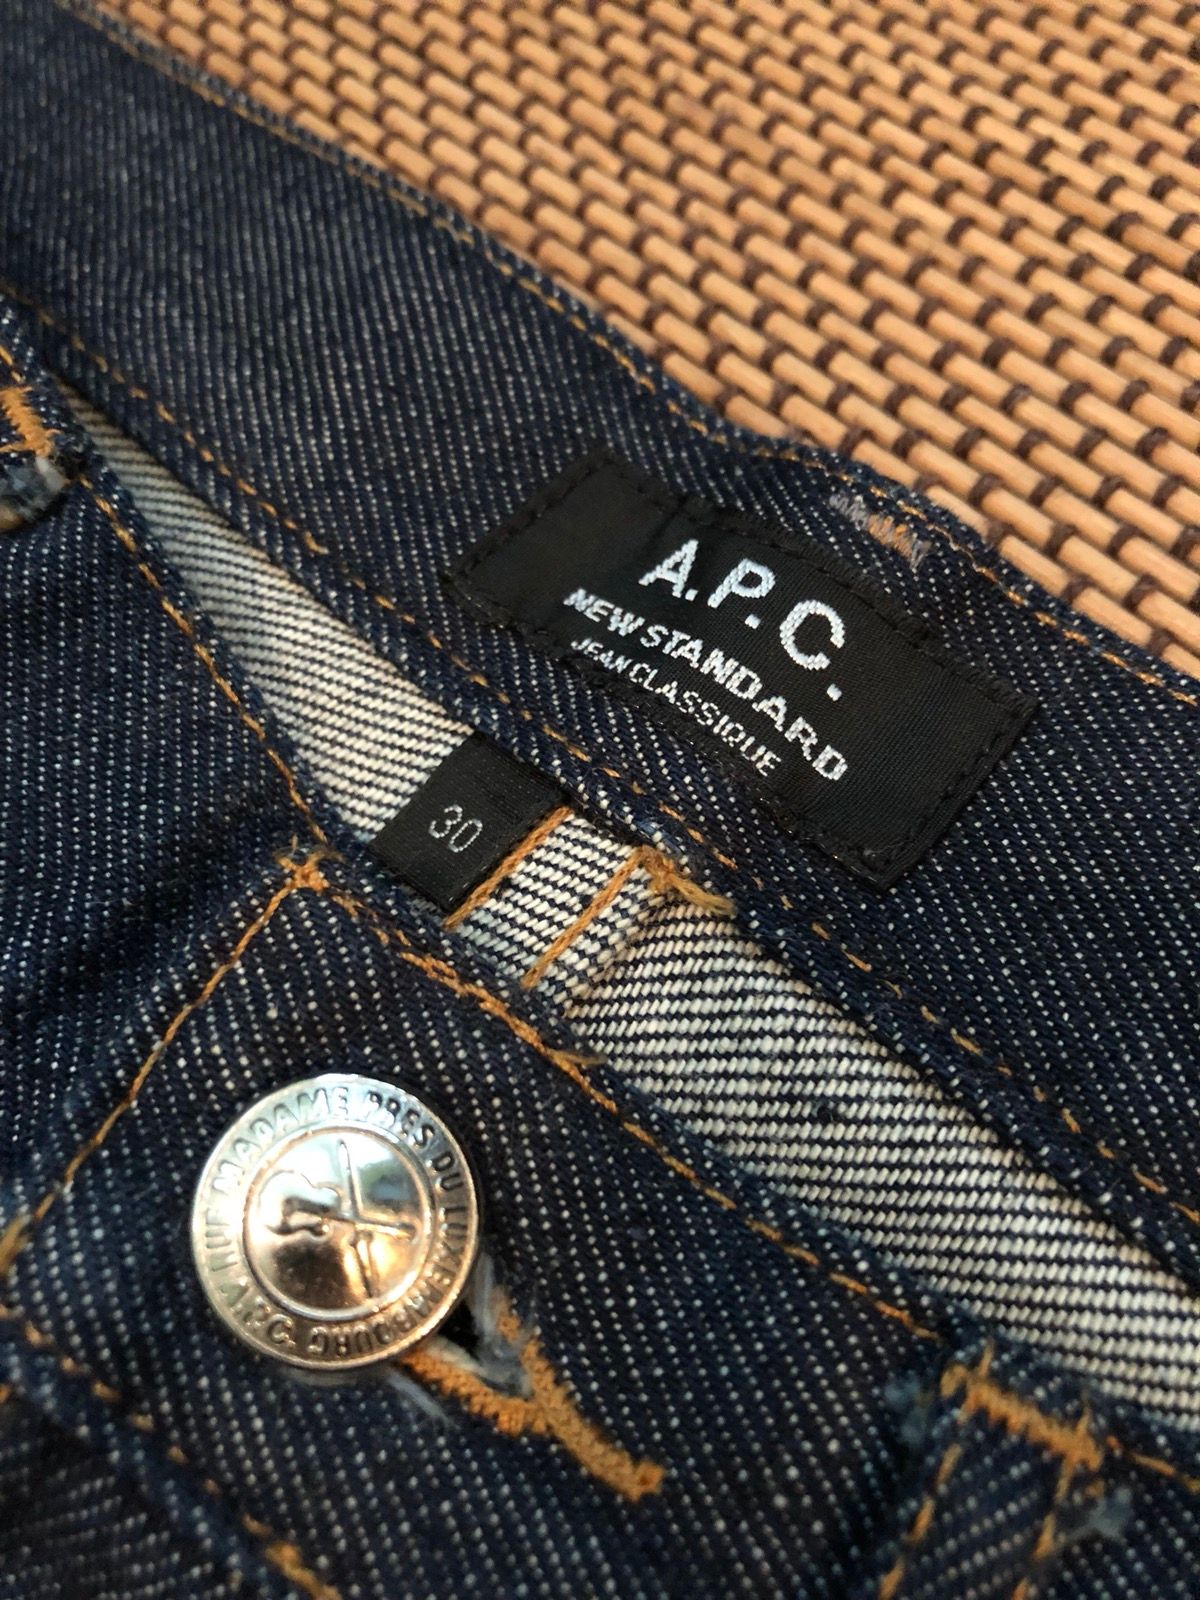 A P C Jeans: New Standard in Null, Men's (Size 30) Product Image